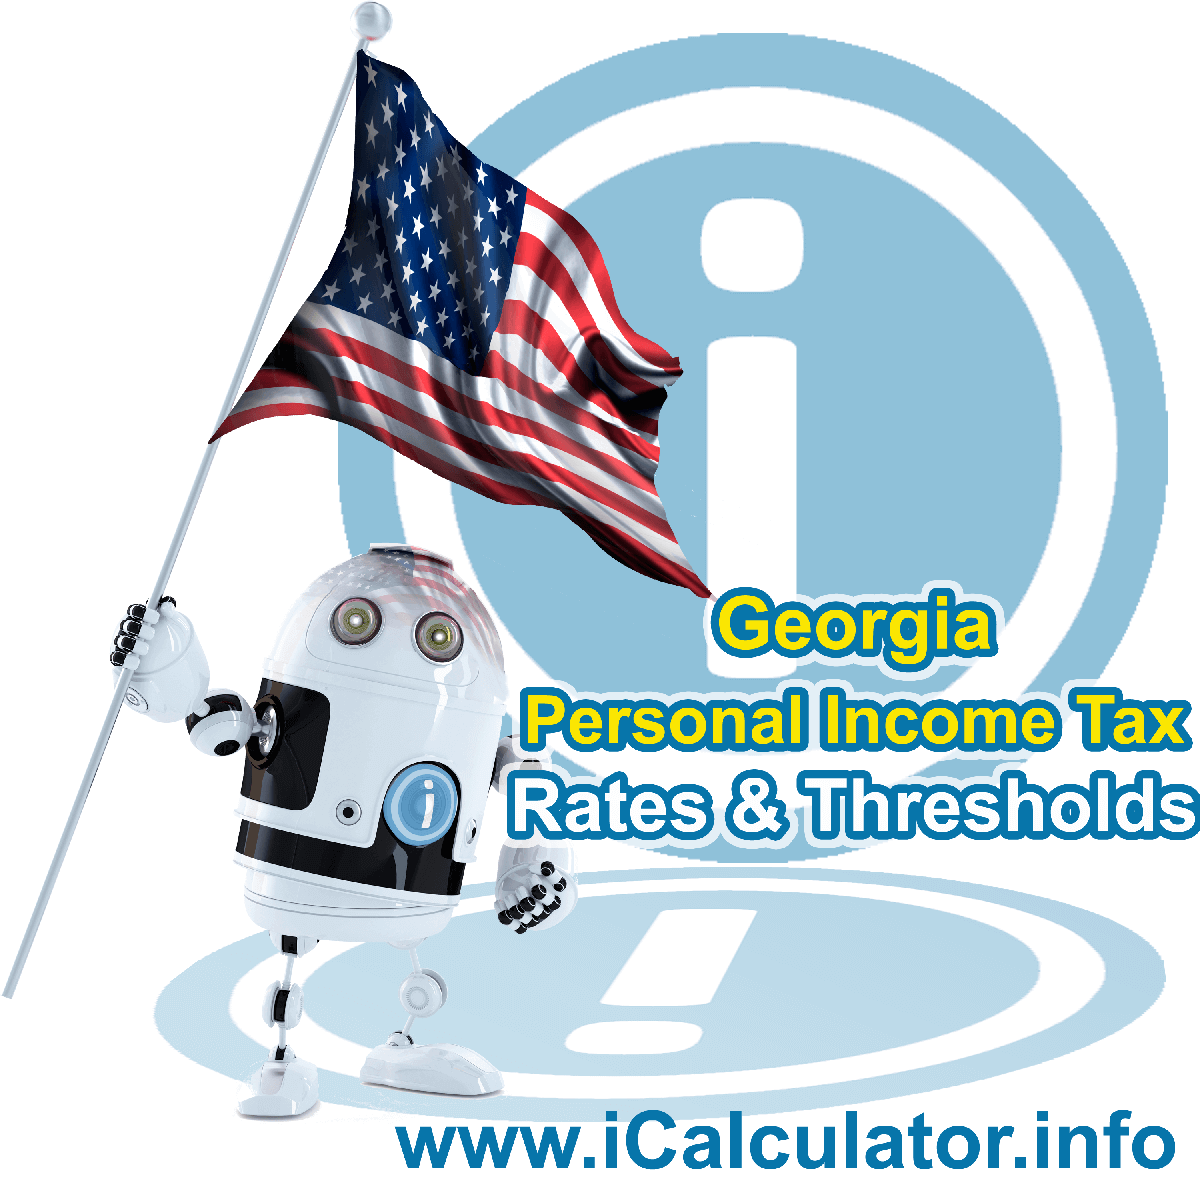 Georgia State Tax Tables 2014. This image displays details of the Georgia State Tax Tables for the 2014 tax return year which is provided in support of the 2014 US Tax Calculator